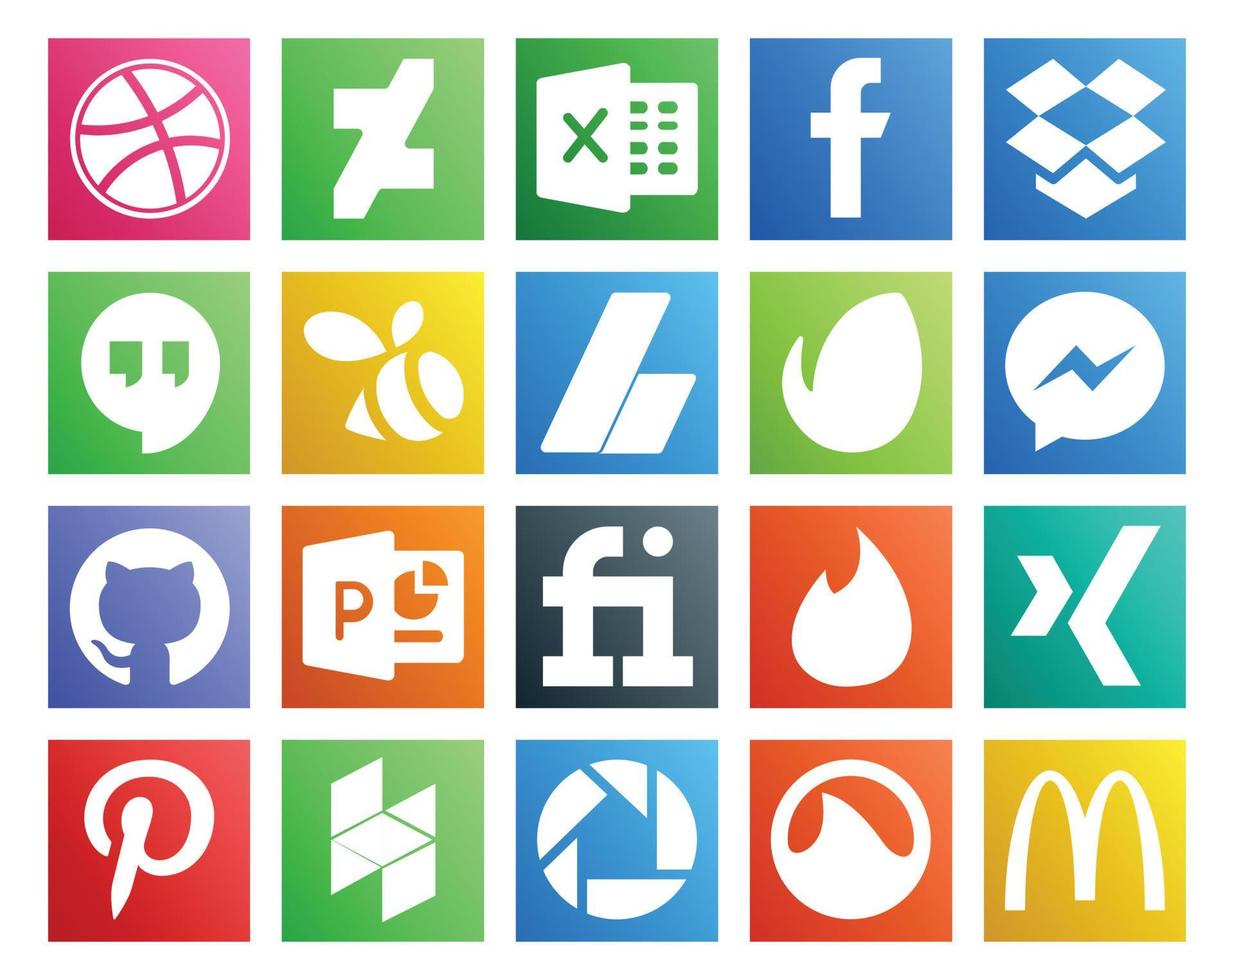 20 Social Media Icon Pack Including houzz xing ads tinder powerpoint vector